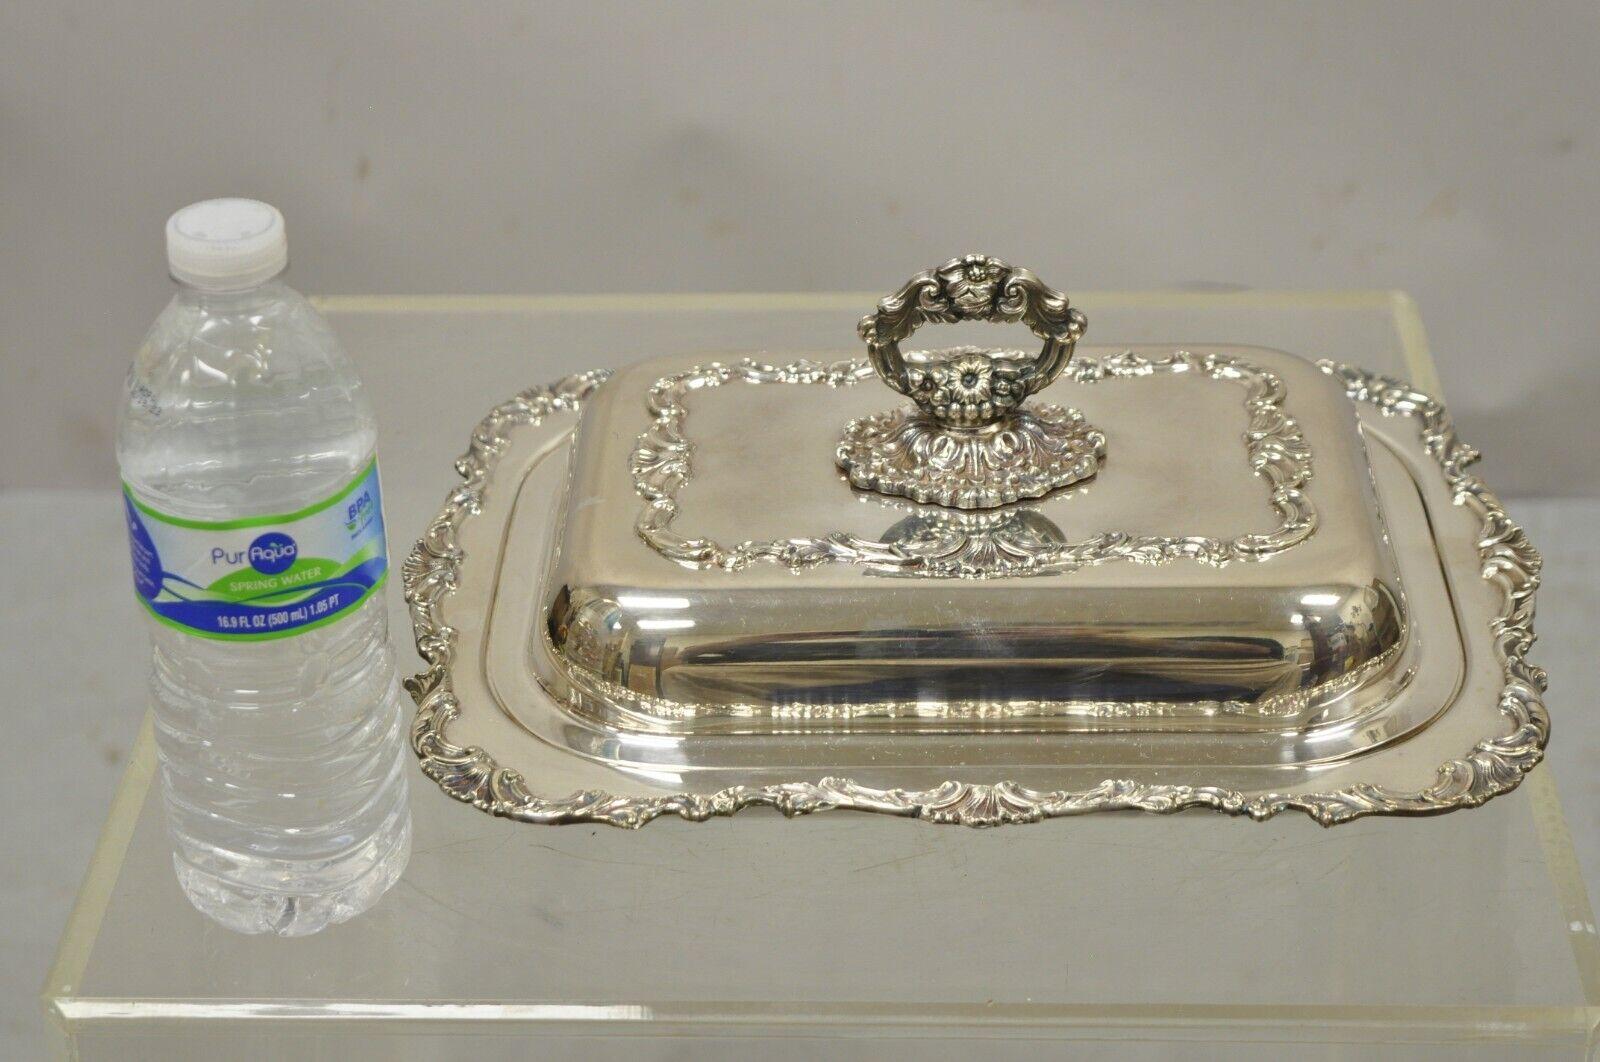 Vintage Regency Style silver plated covered vegetable dish serving platter.
Item features an ornate removable handle, 2 interior sections, ornate decoration throughout. Circa Mid 20th Century. Measurements: 5.5